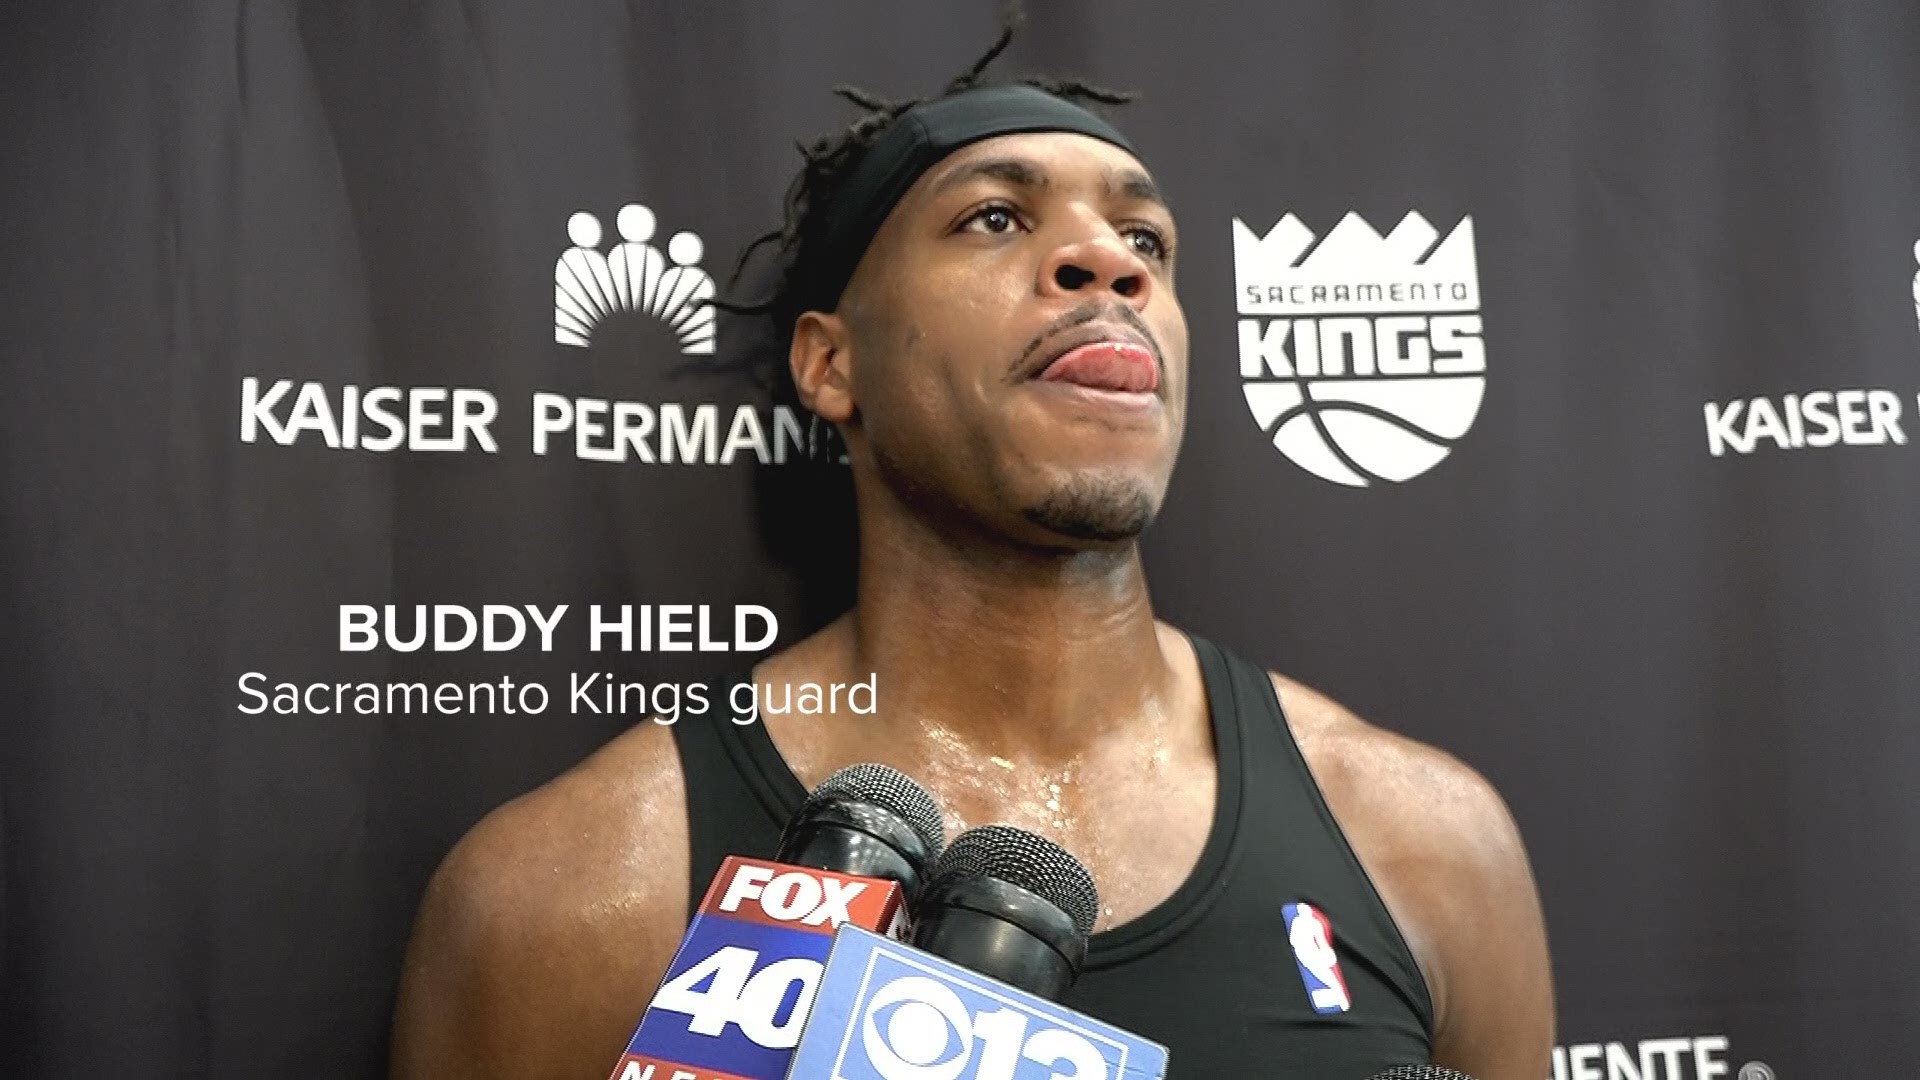 After going 2-1 on their first East Coast road trip of the season, the Sacramento Kings are preparing to face the Portland Trail Blazers for the second time.